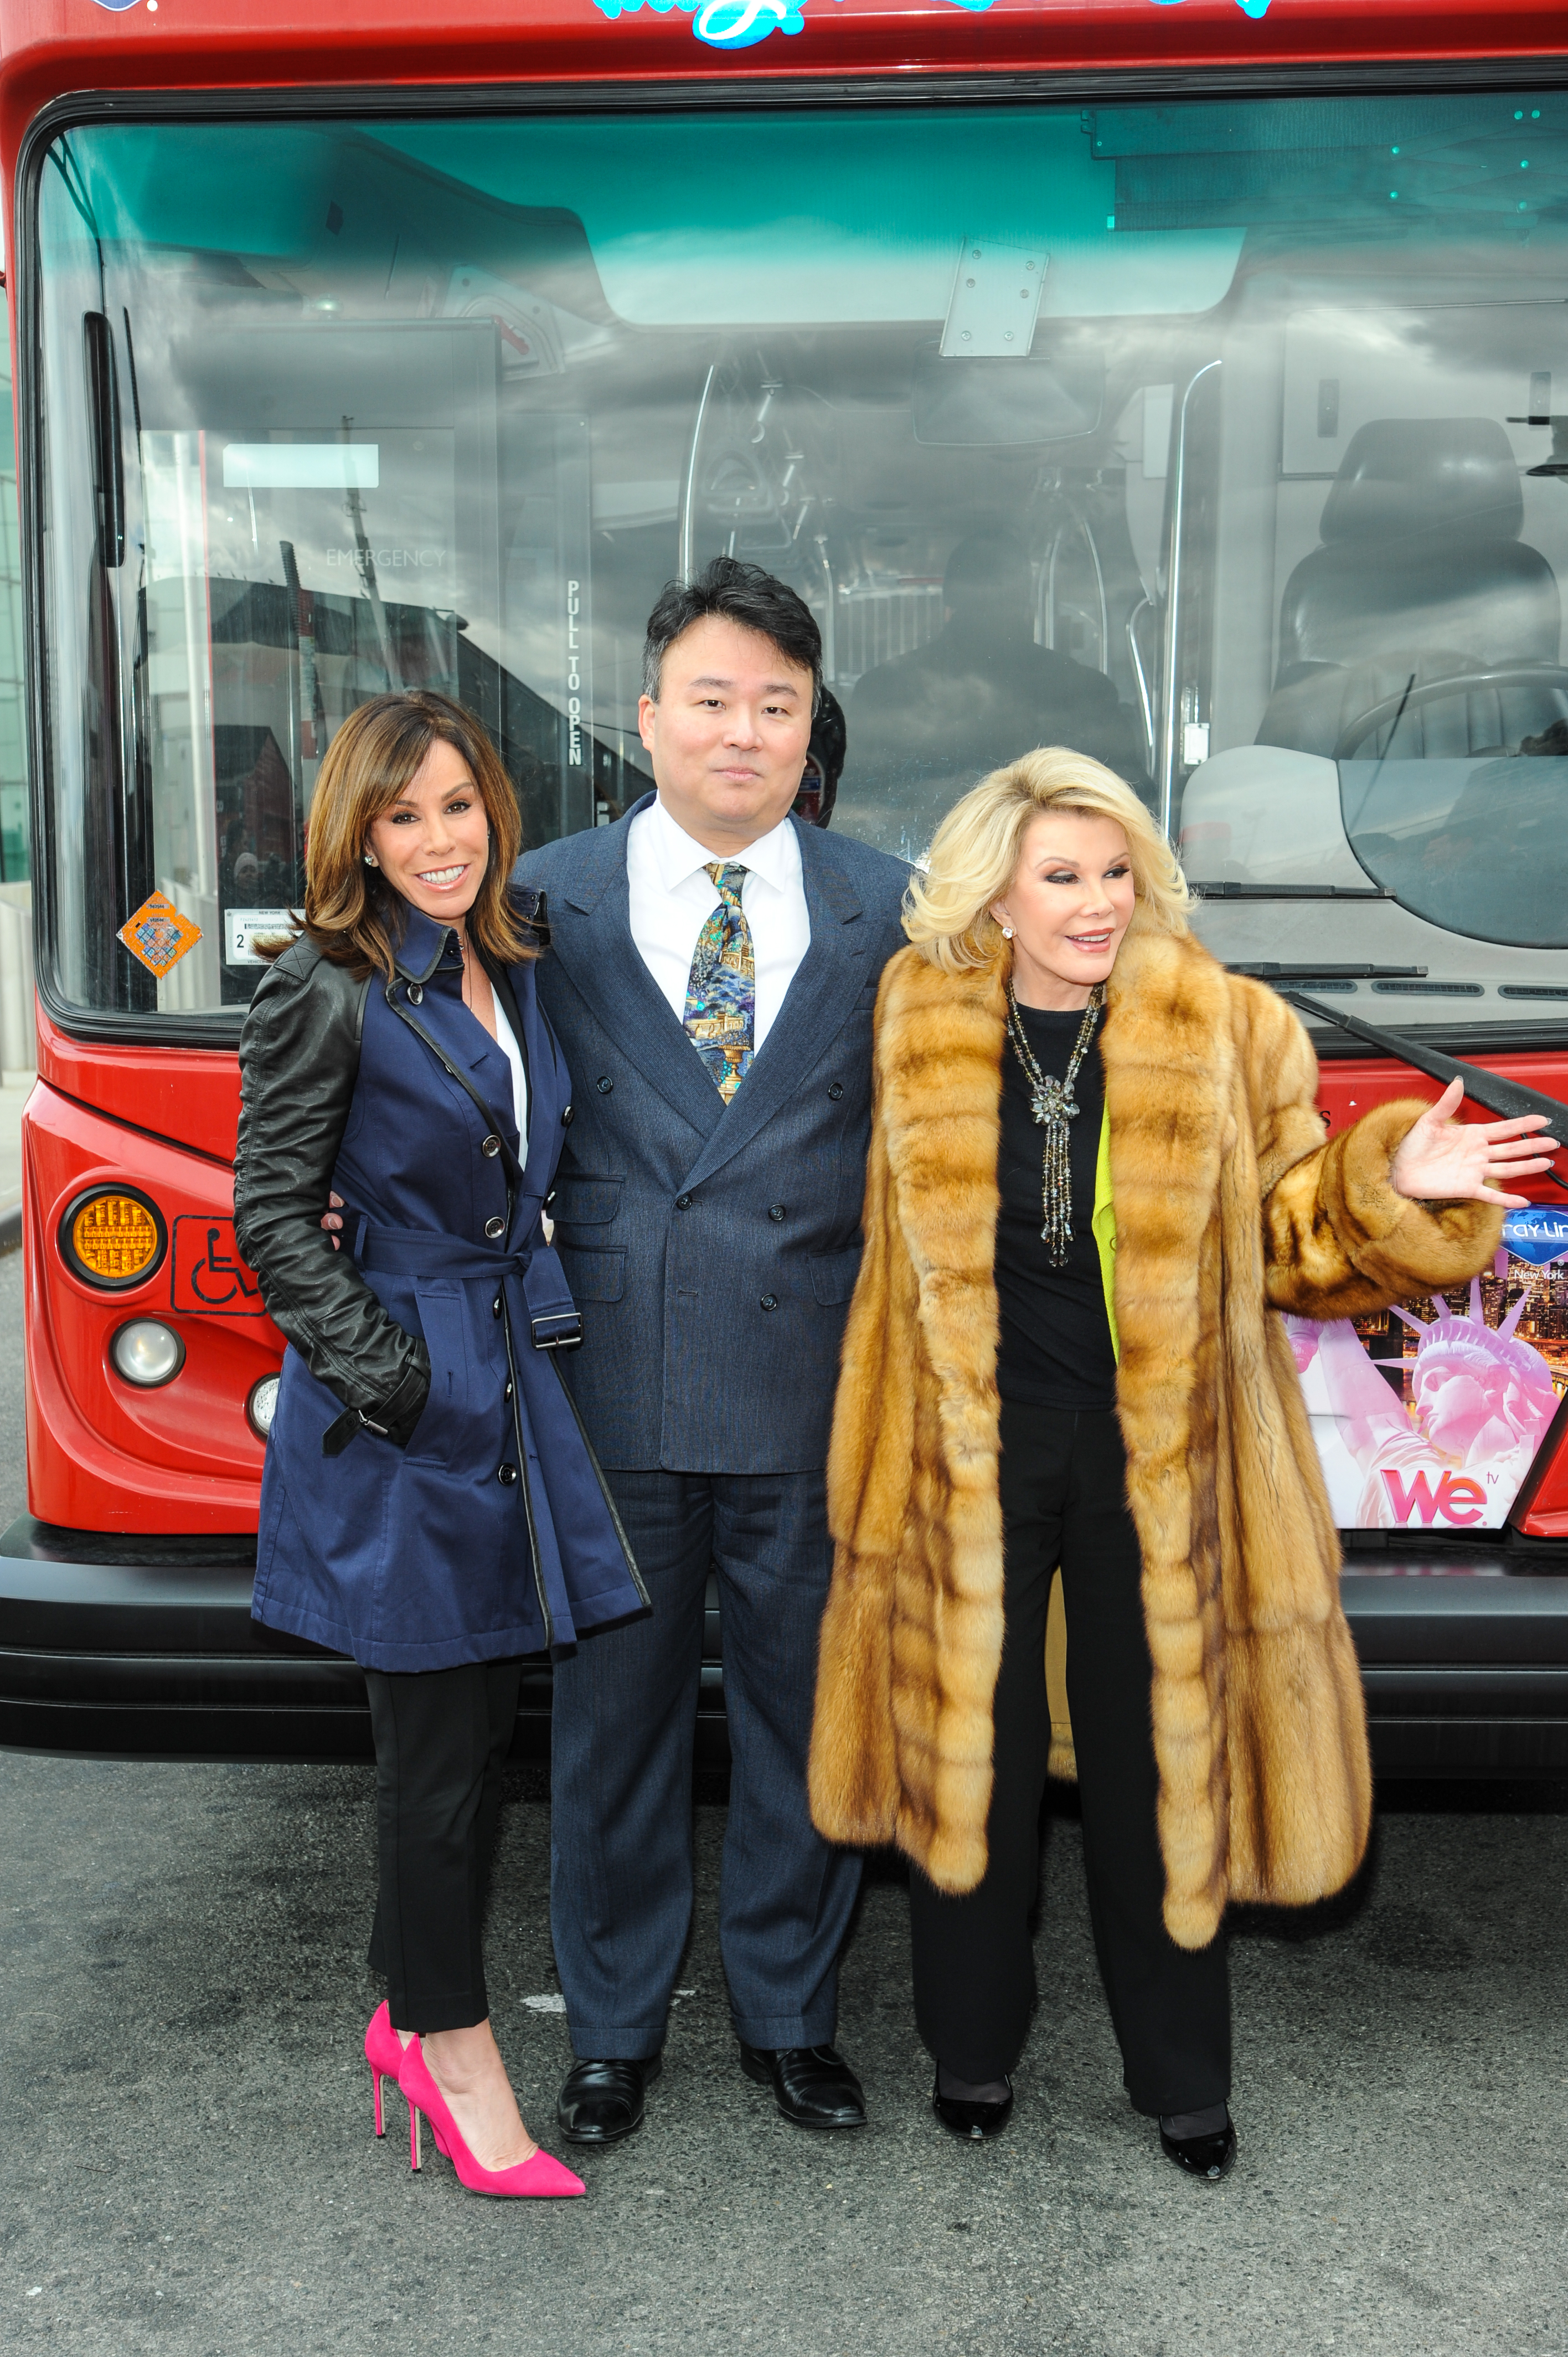 David W. Chien poses with Joan Rivers and Melissa Rivers at Ride of Fame (March 1st, 2013).